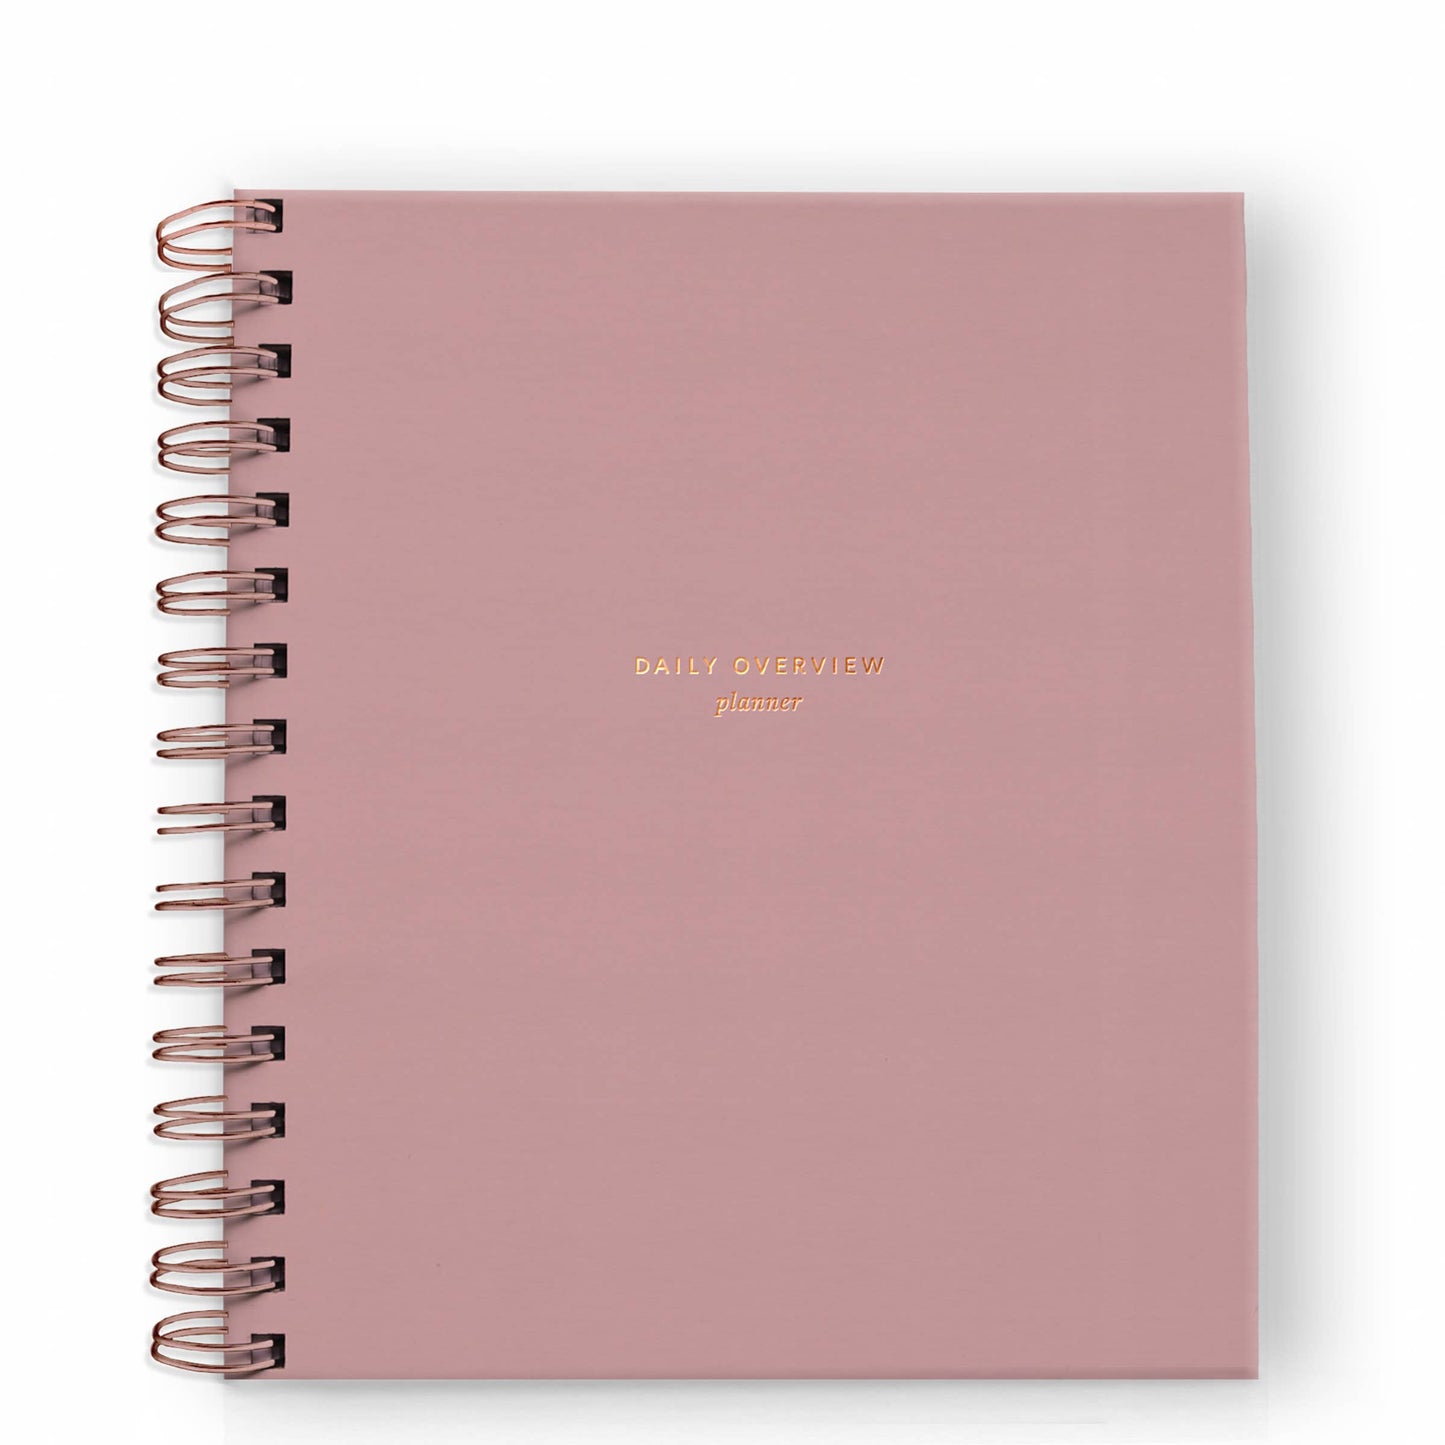 Daily Overview Planner in Dusty Rose